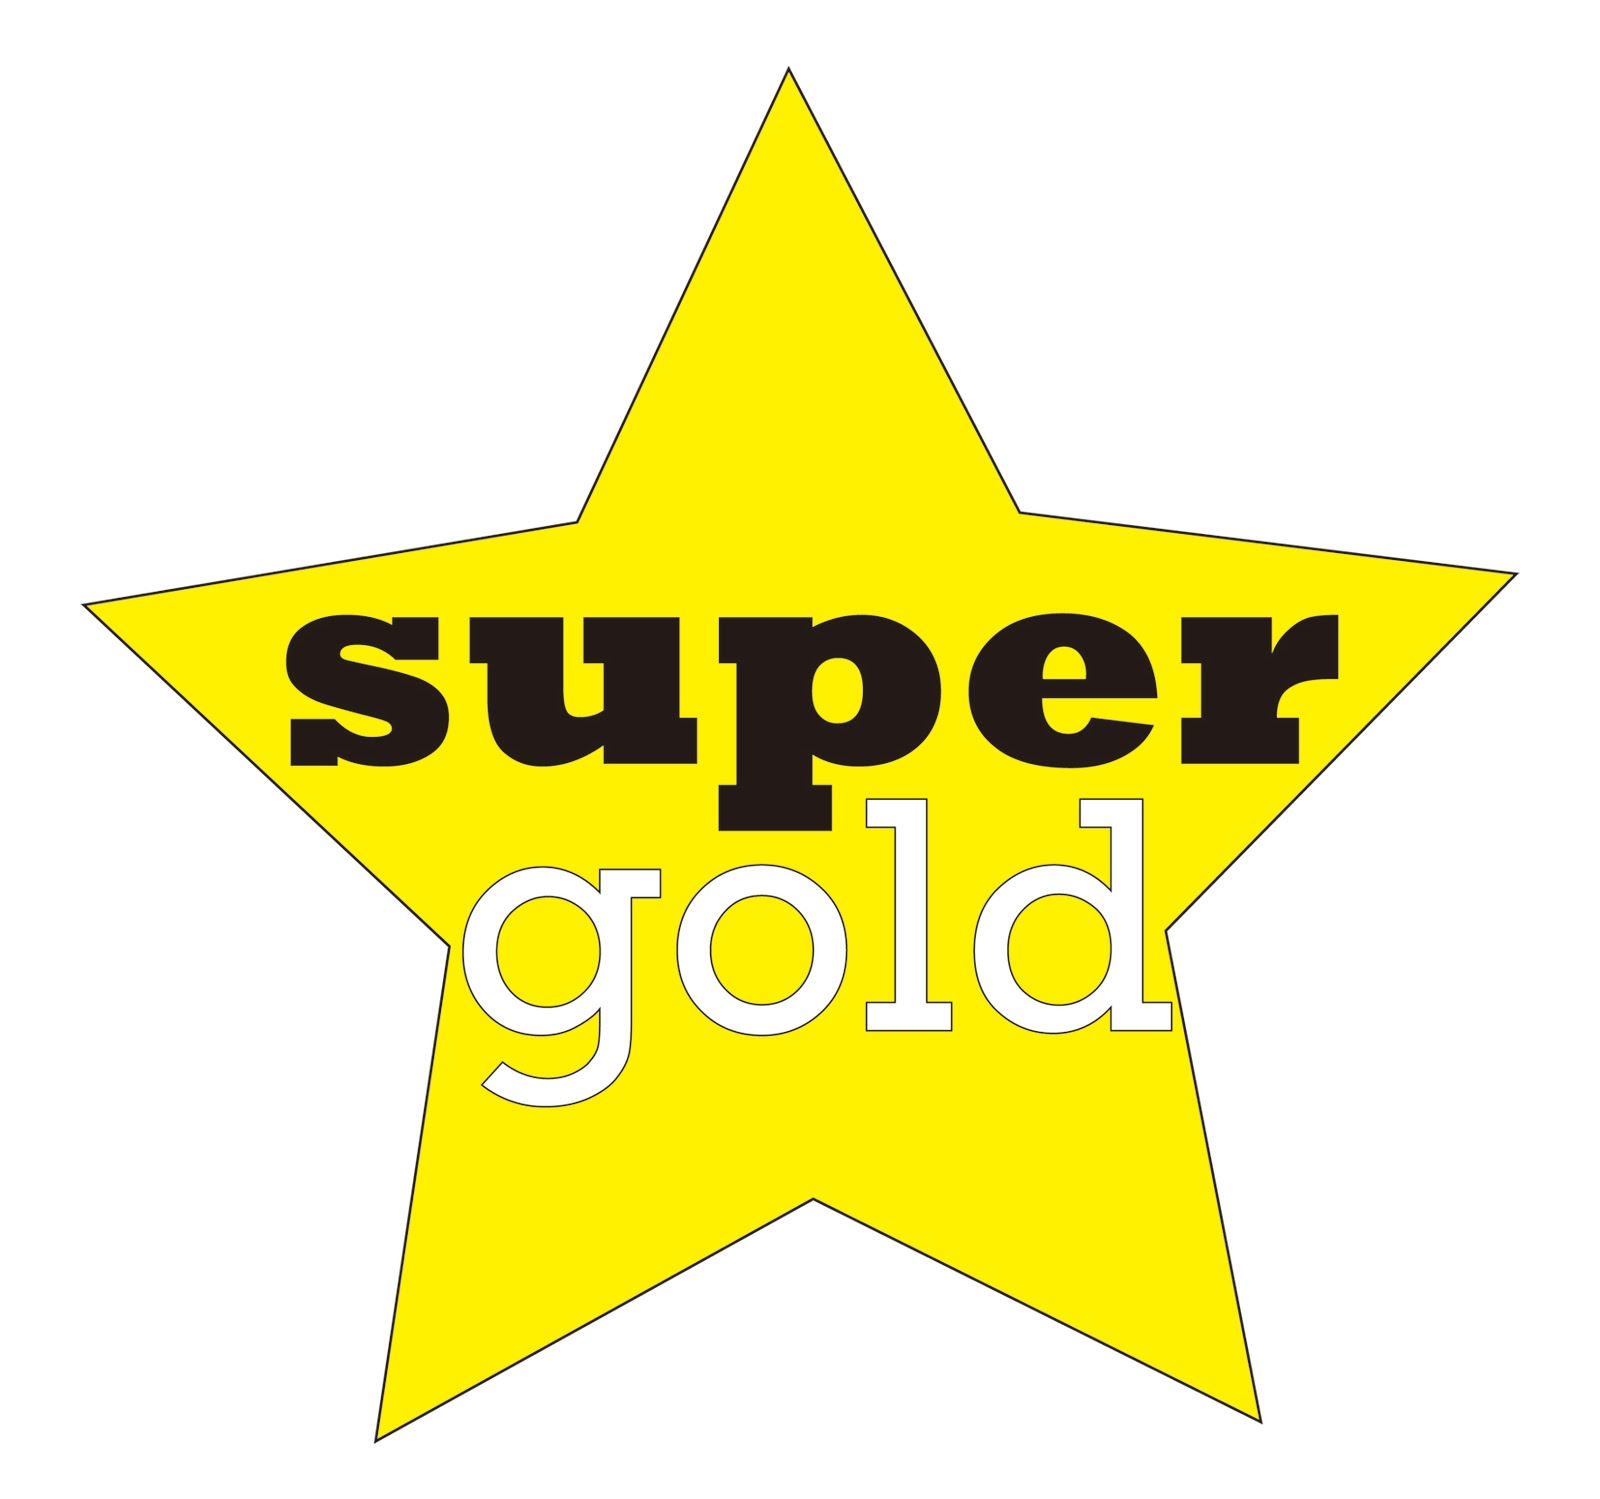 Picture Of A Gold Star - ClipArt Best